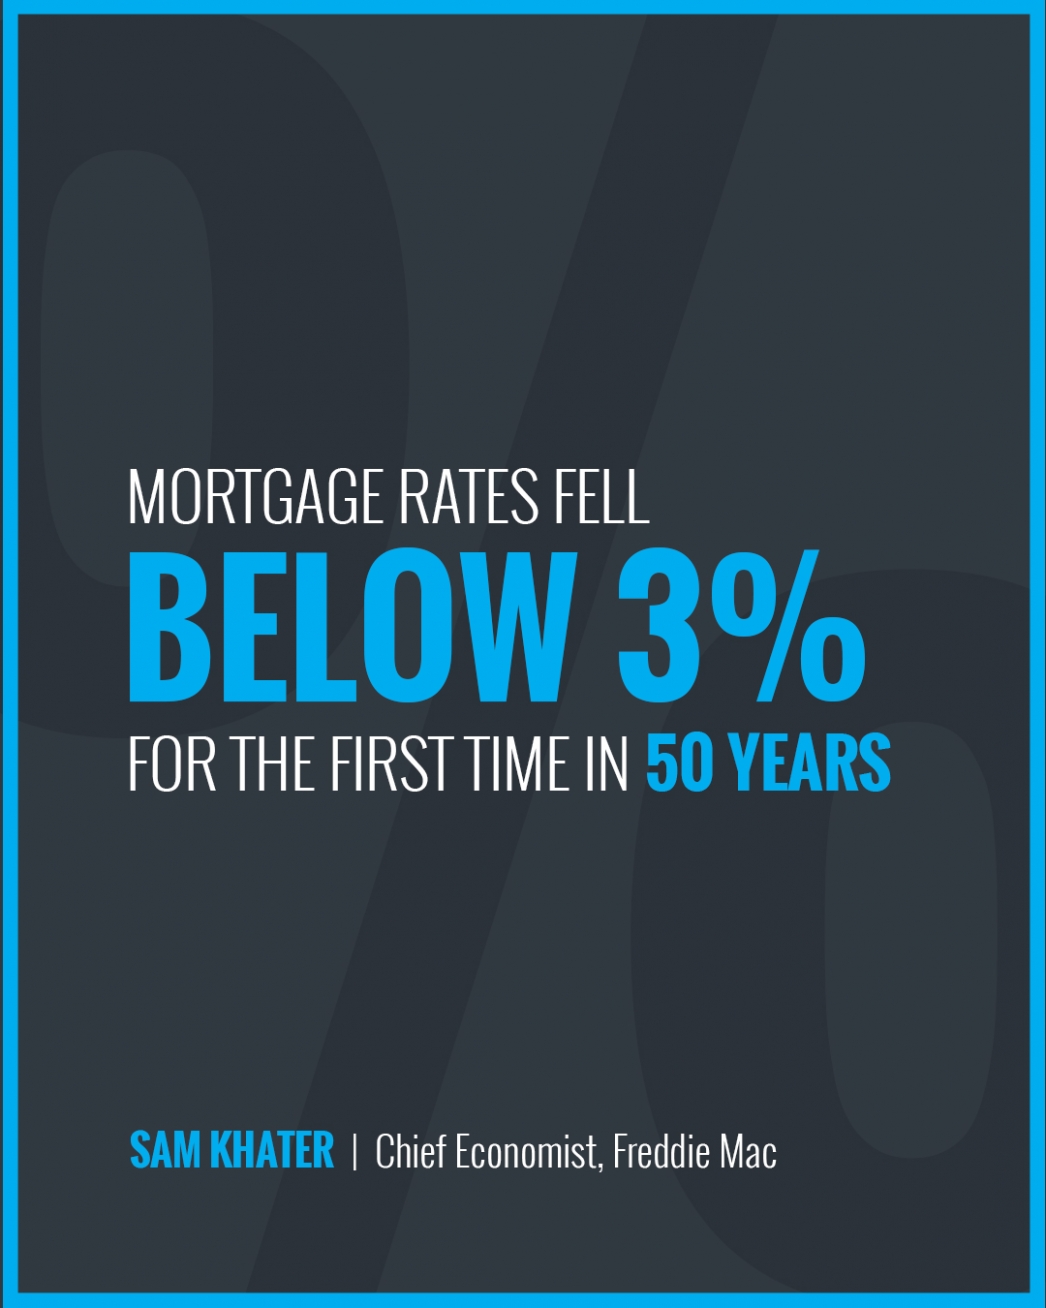 Mortgage Rates Fall Below 3% [INFOGRAPHIC]